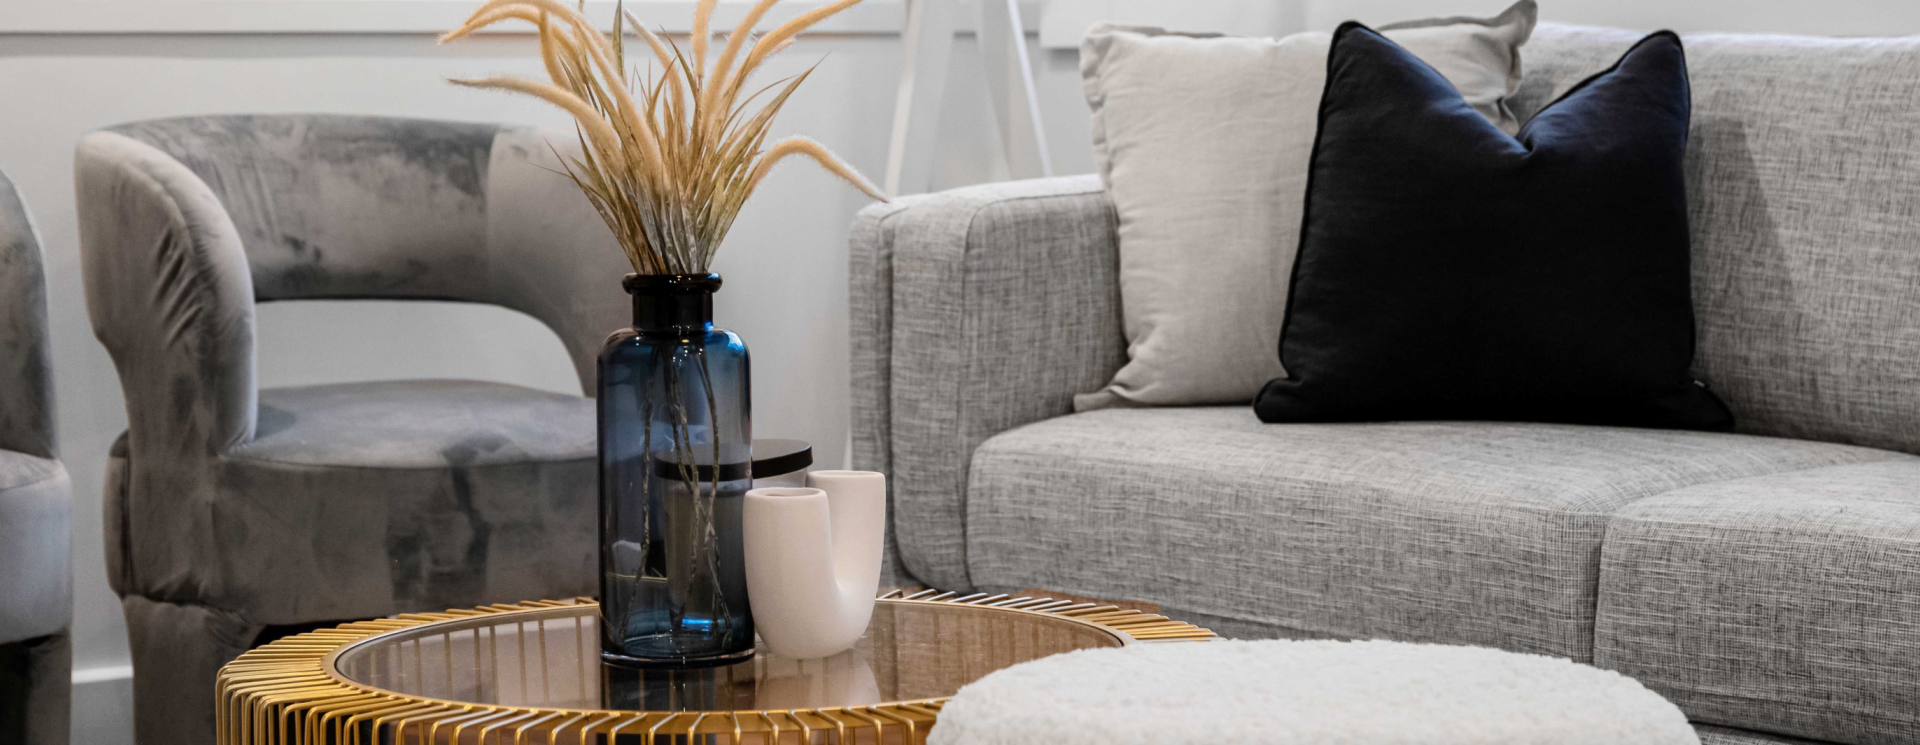 Property Staging | Home Styling - Sell in Style